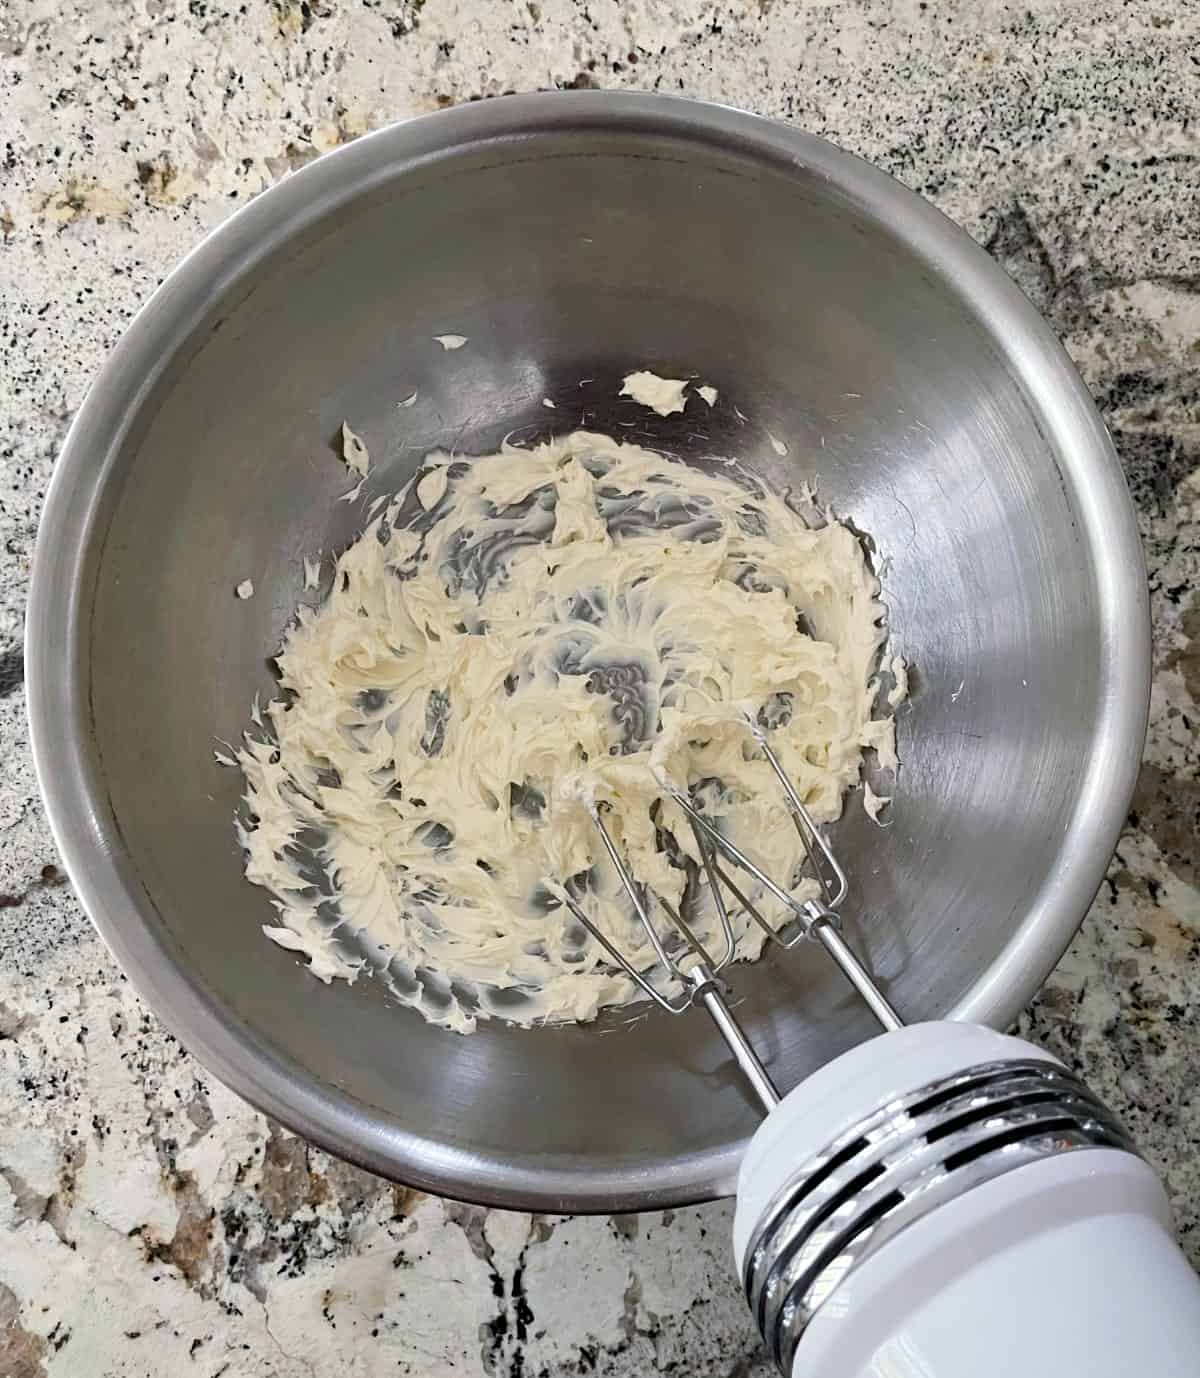 Beating light cream cheese in mixing bowl with electric hand mixer.